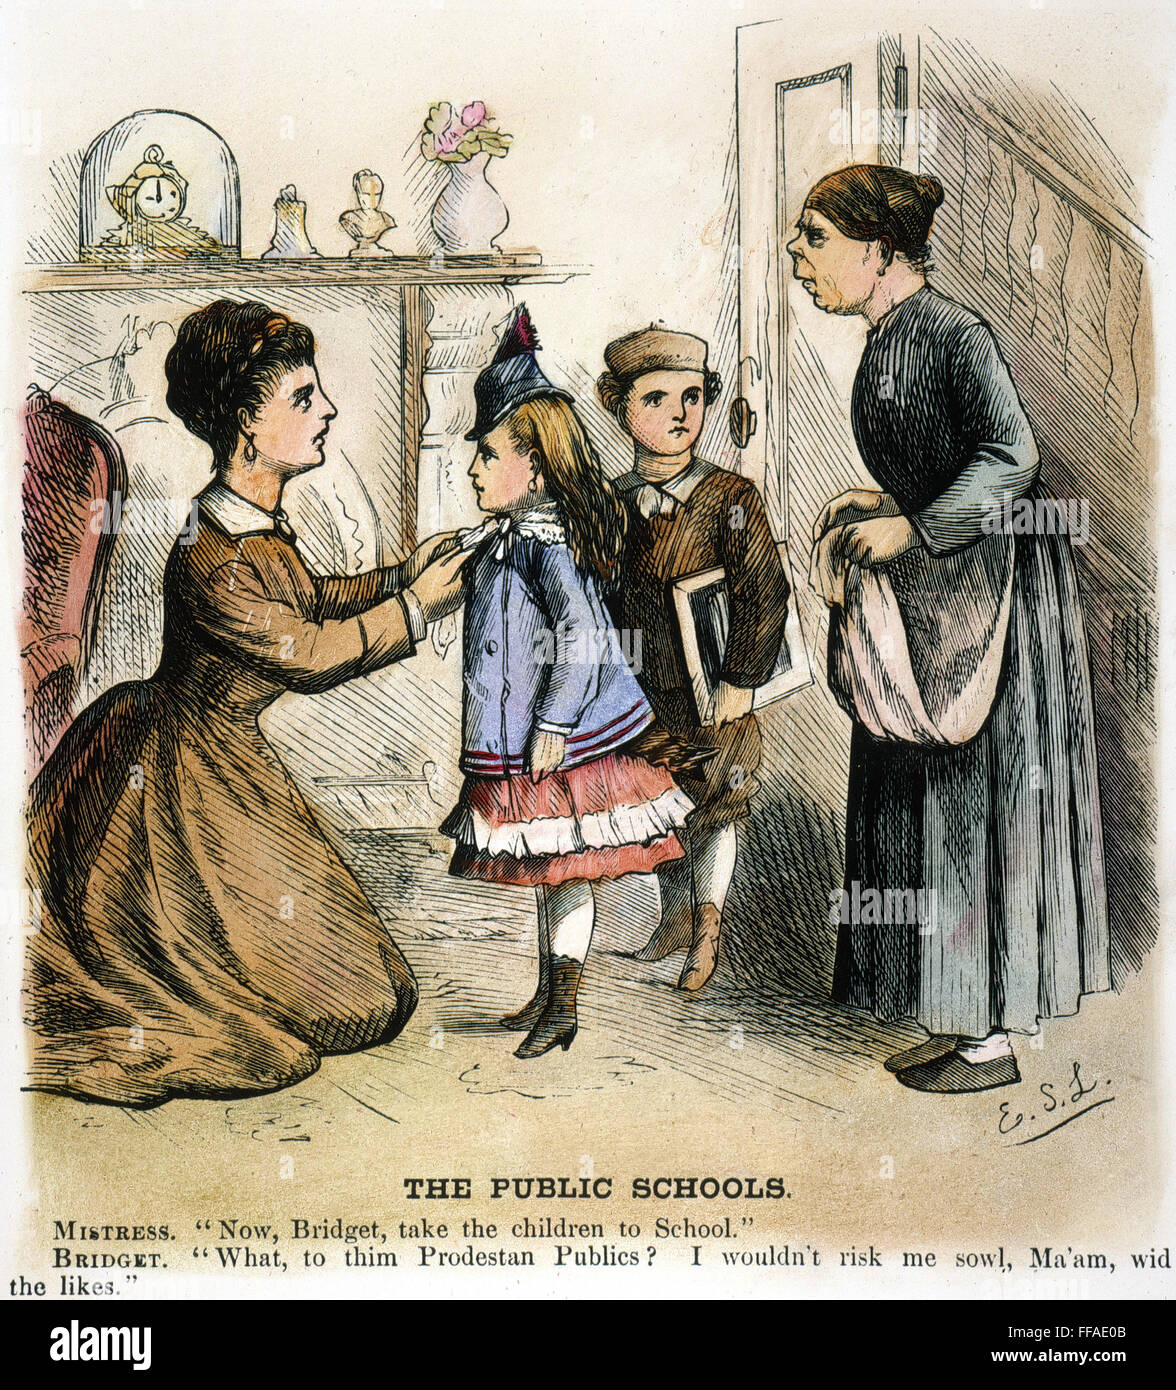 IRISH IMMIGRANTS CARTOON. /n'The Public Schools.' American cartoon from 1873 suggesting that the newly arrived Irish do not trust the public (therefore not Catholic) schools. Stock Photo